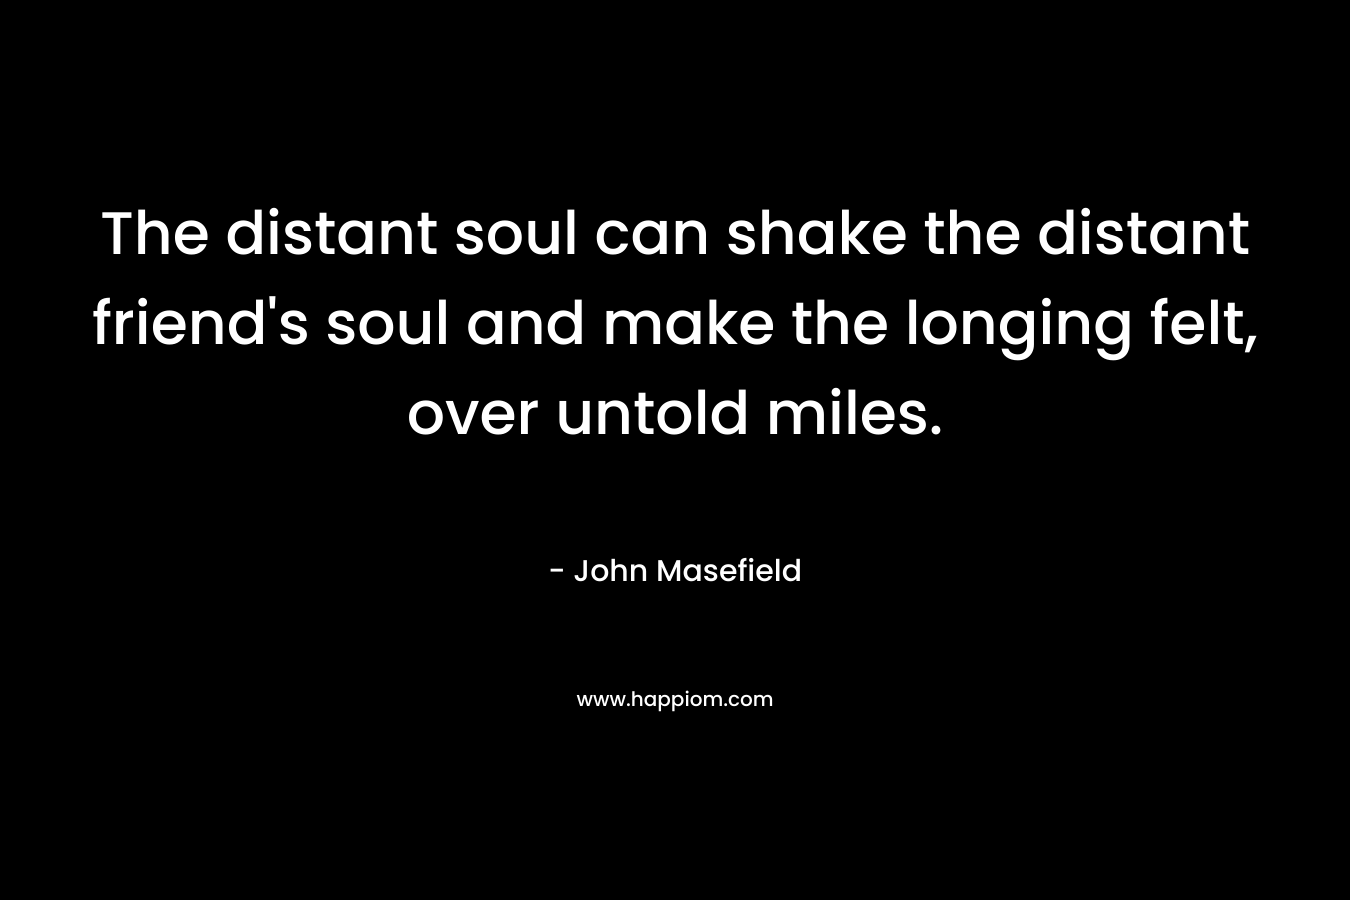 The distant soul can shake the distant friend’s soul and make the longing felt, over untold miles. – John Masefield